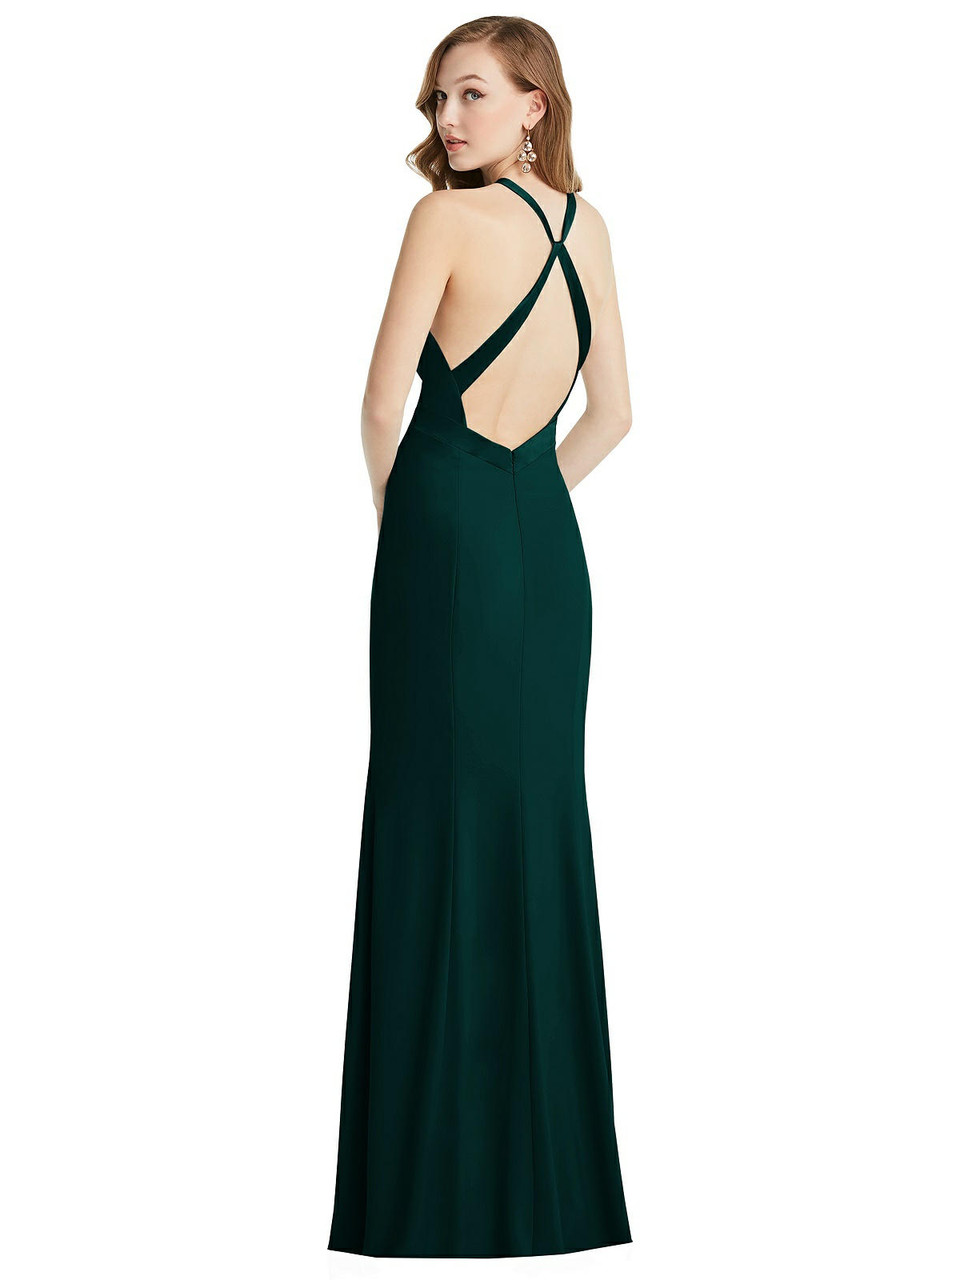 After Six Bridesmaid Dress Style 6848 - Crepe - High-Neck Halter Dress with Twist Criss Cross Back